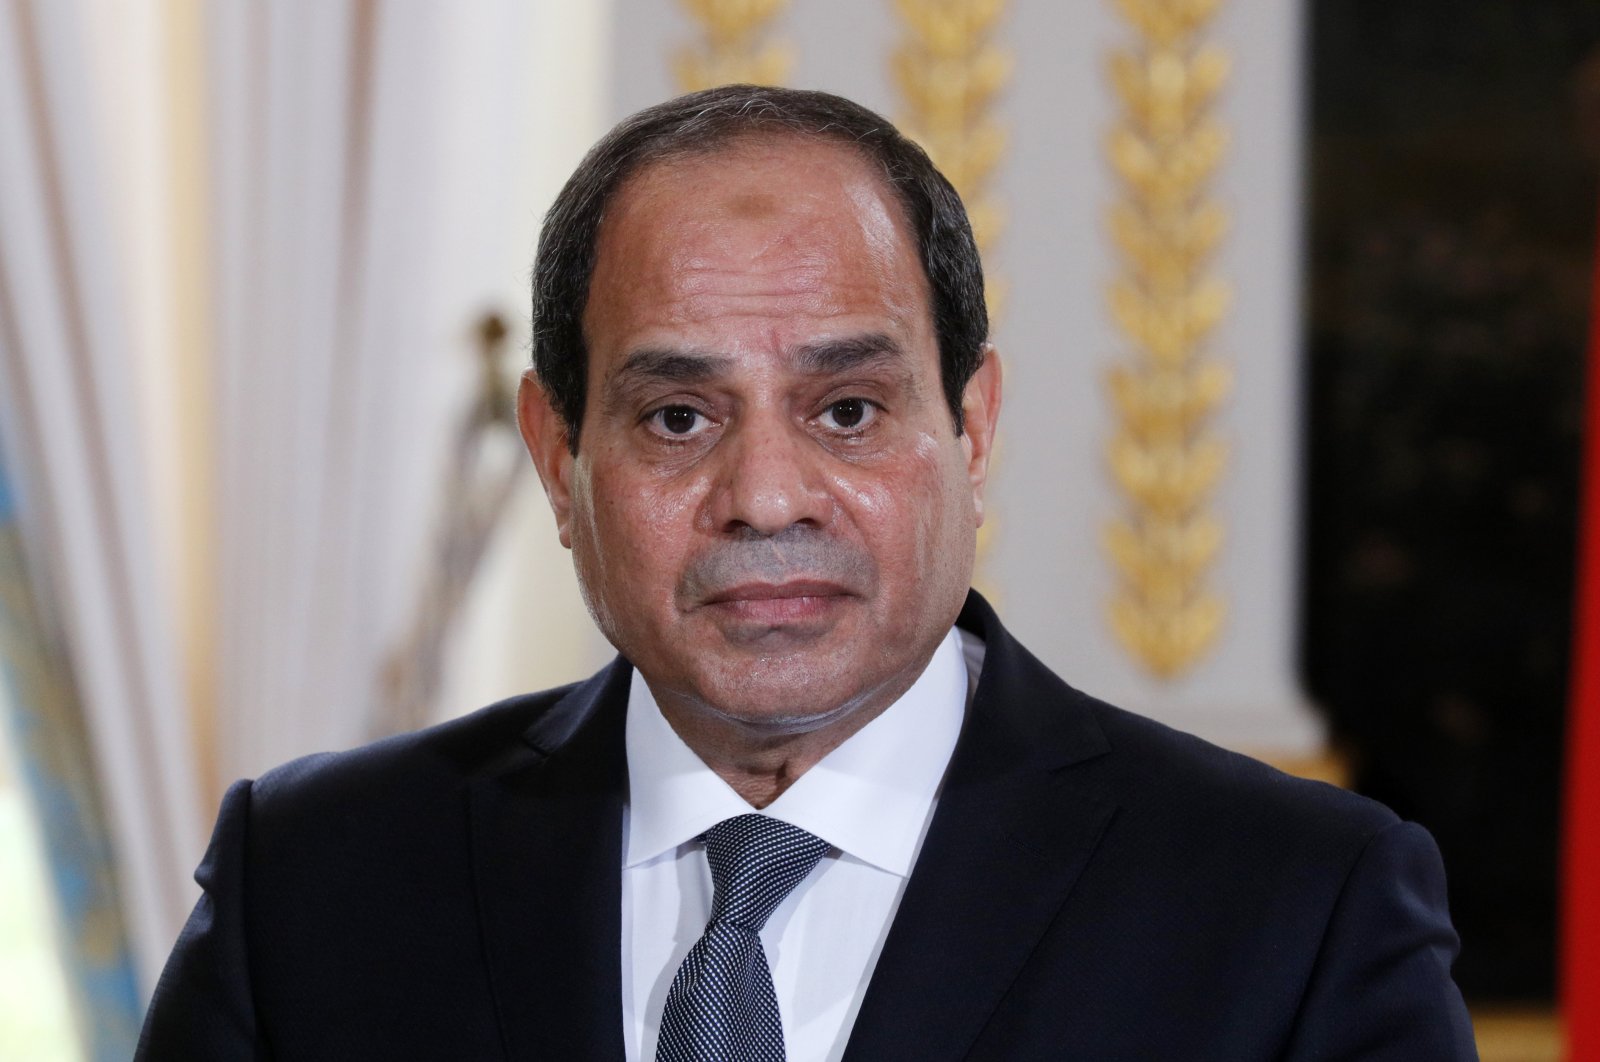 Egyptian President Abdel Fattah el-Sissi attends a news conference with French President Emmanuel Macron, not pictured, at the Elysee Palace, in Paris, France, Oct. 24, 2017. (EPA Photo)